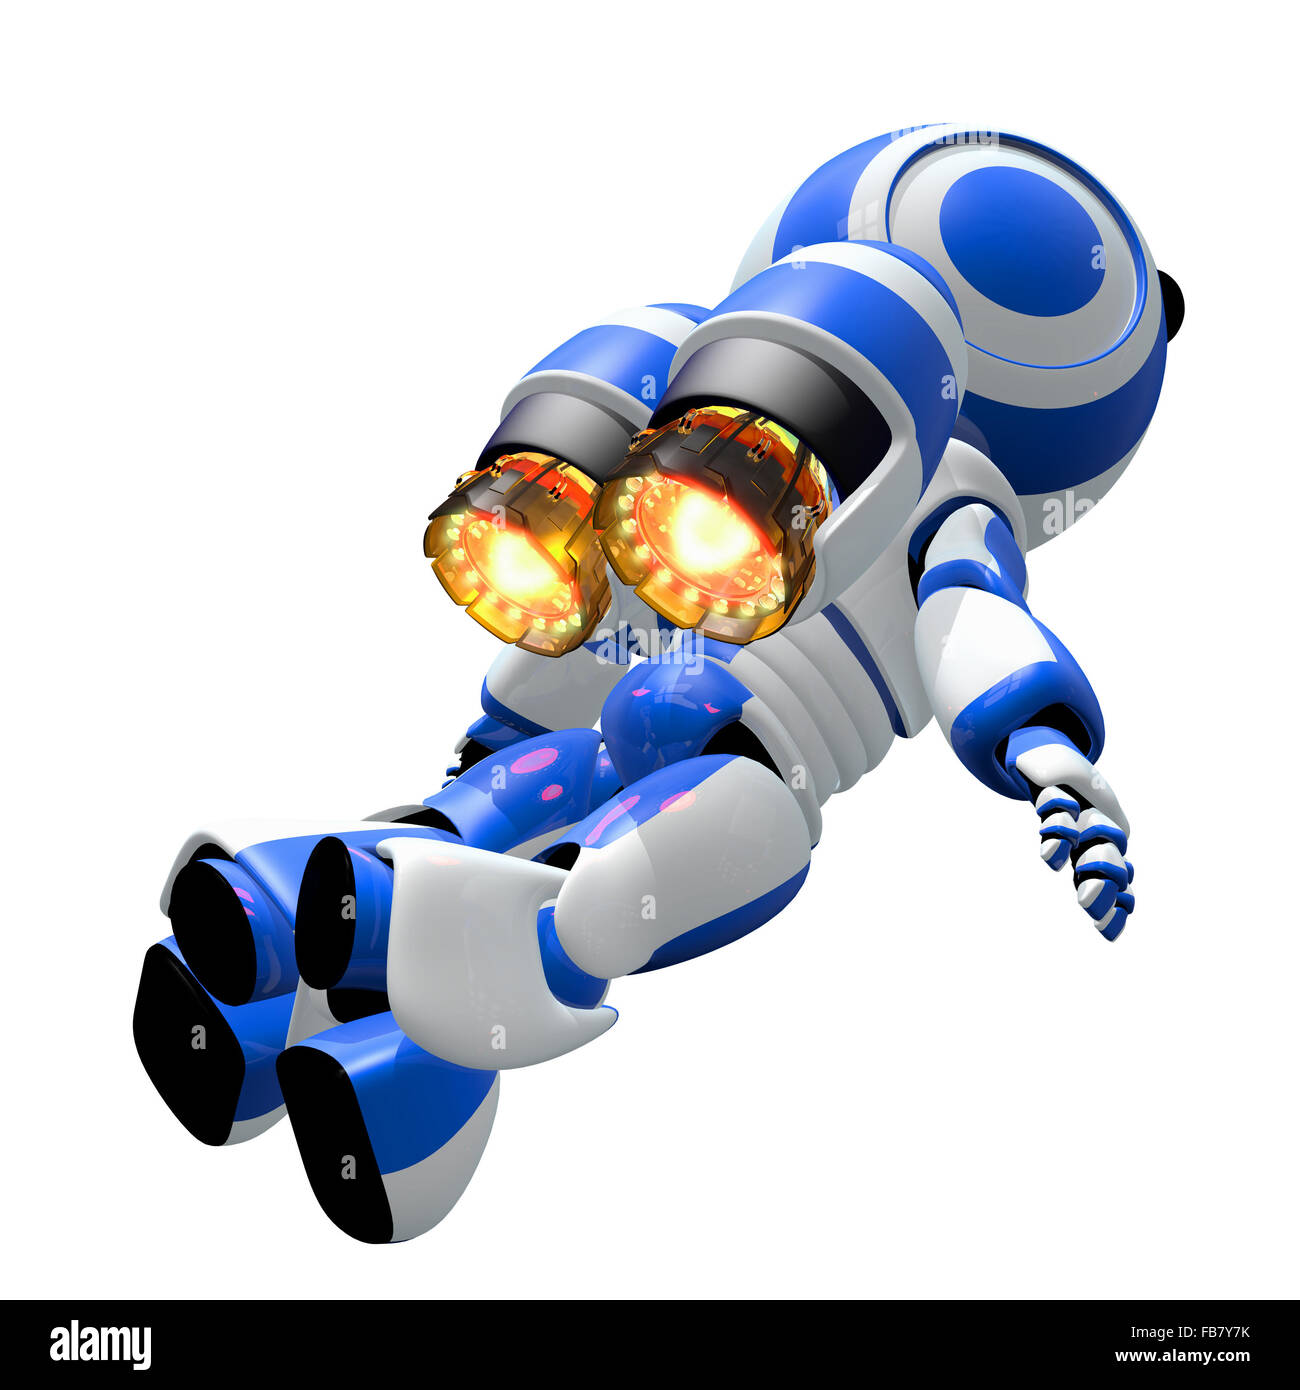 Robot rocketeer flying toward the heavens with burning ignited jets. Inspirational image of discovery. Stock Photo